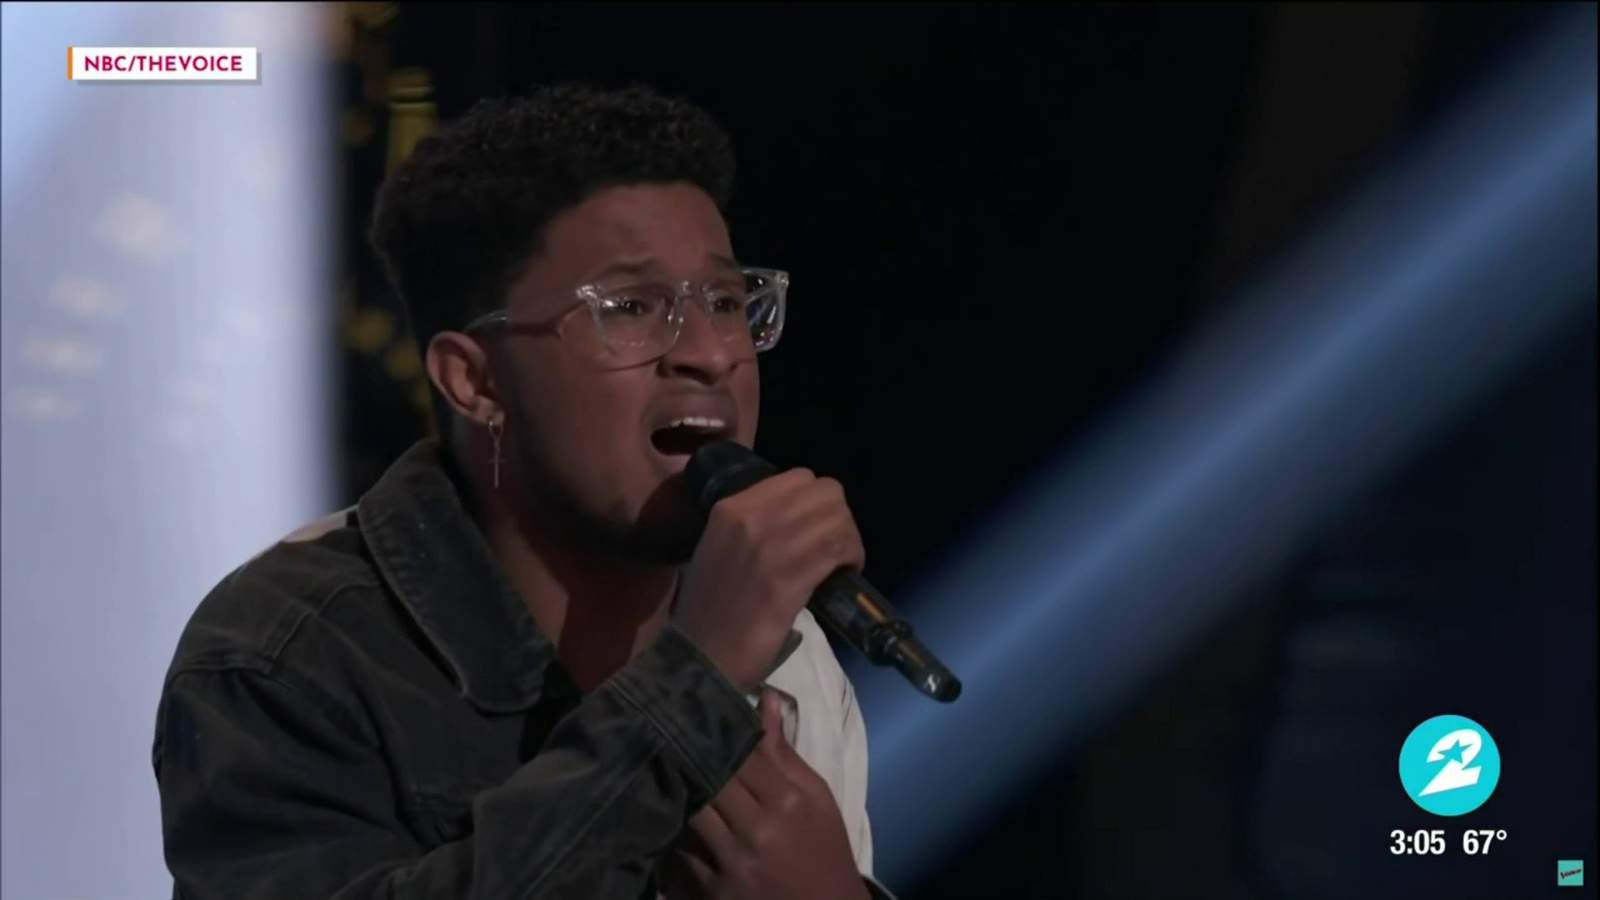 Woodlands singer Zae Romeo gets a 4-chair turn on NBC’s The Voice’